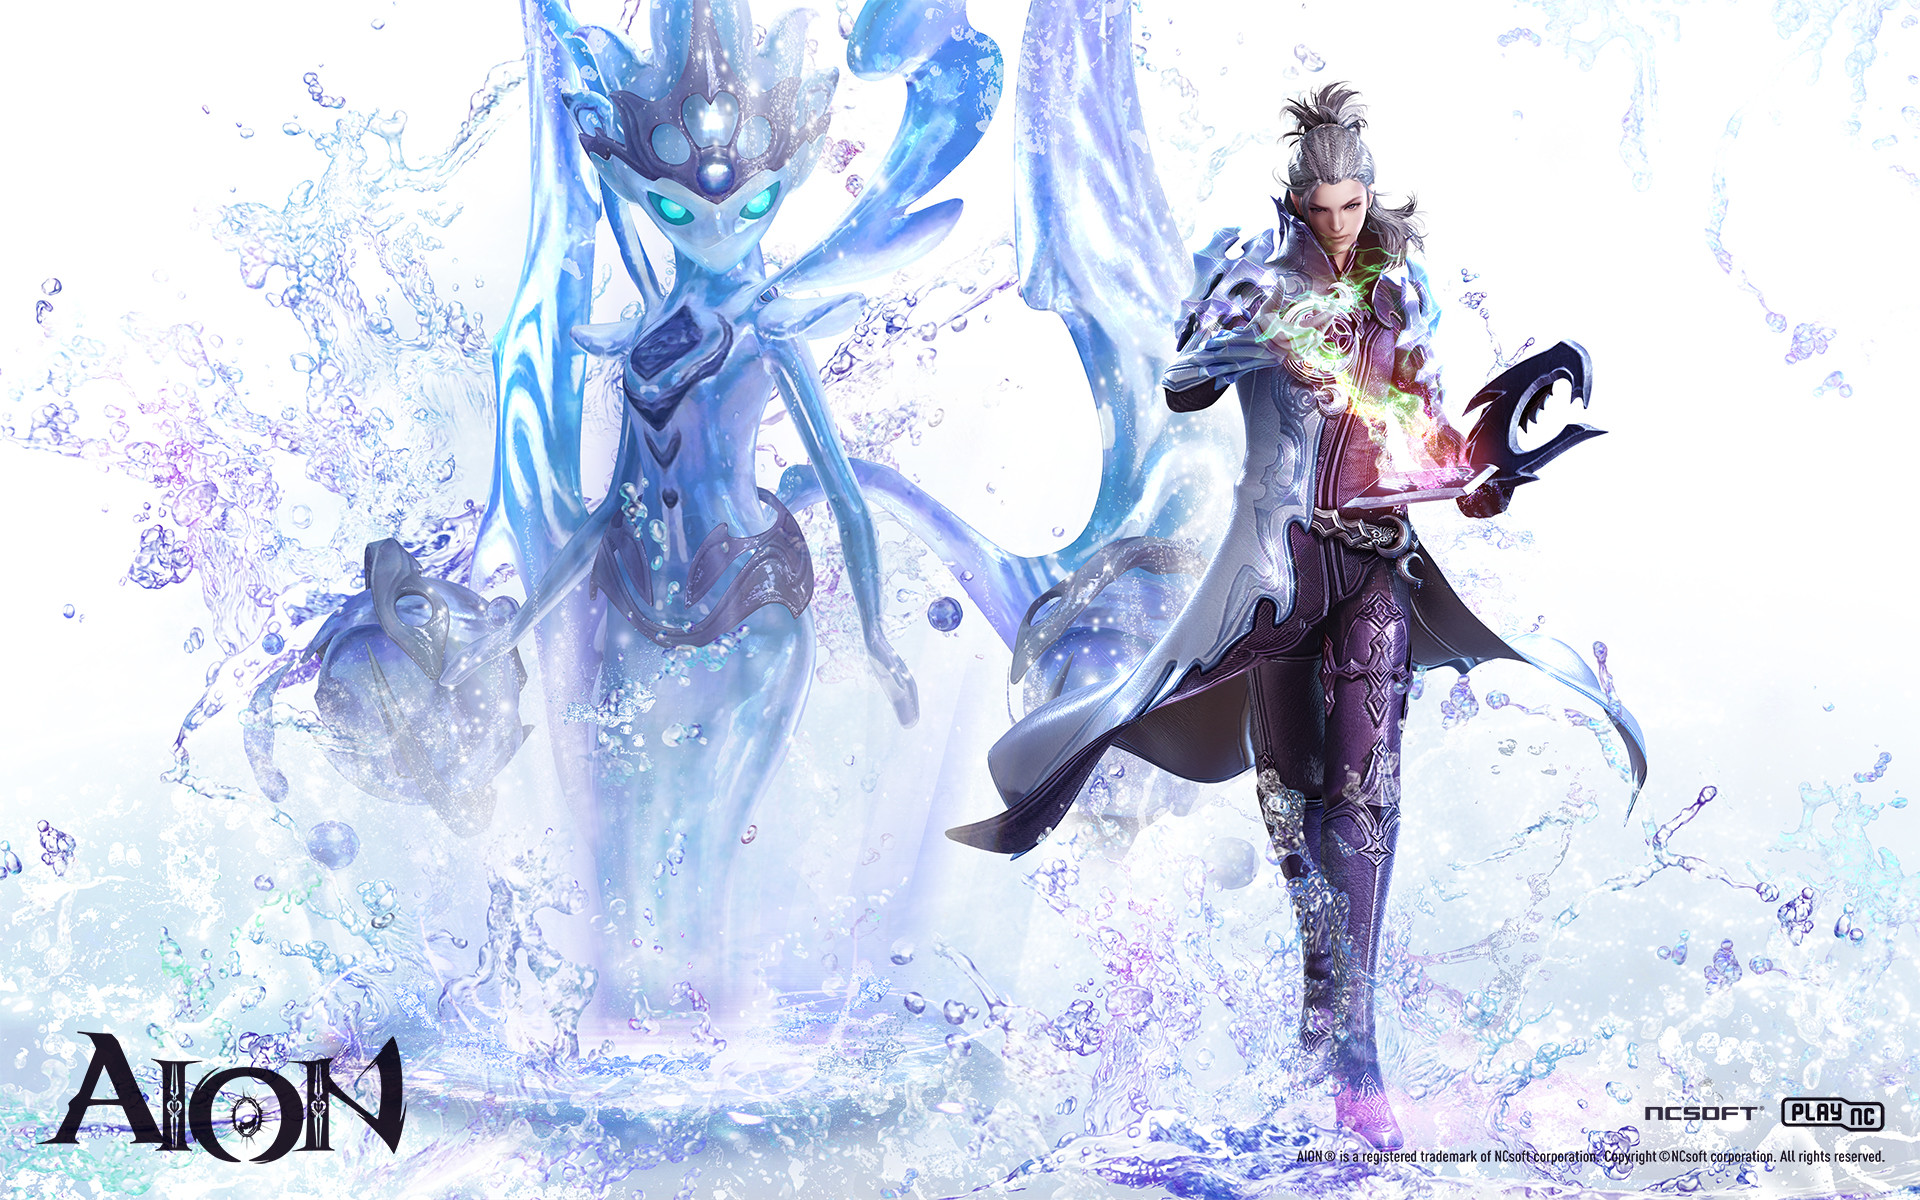 1920x1200 Aion Wallpaper 017 - Asmodian Cleric | Ethereal Games ...